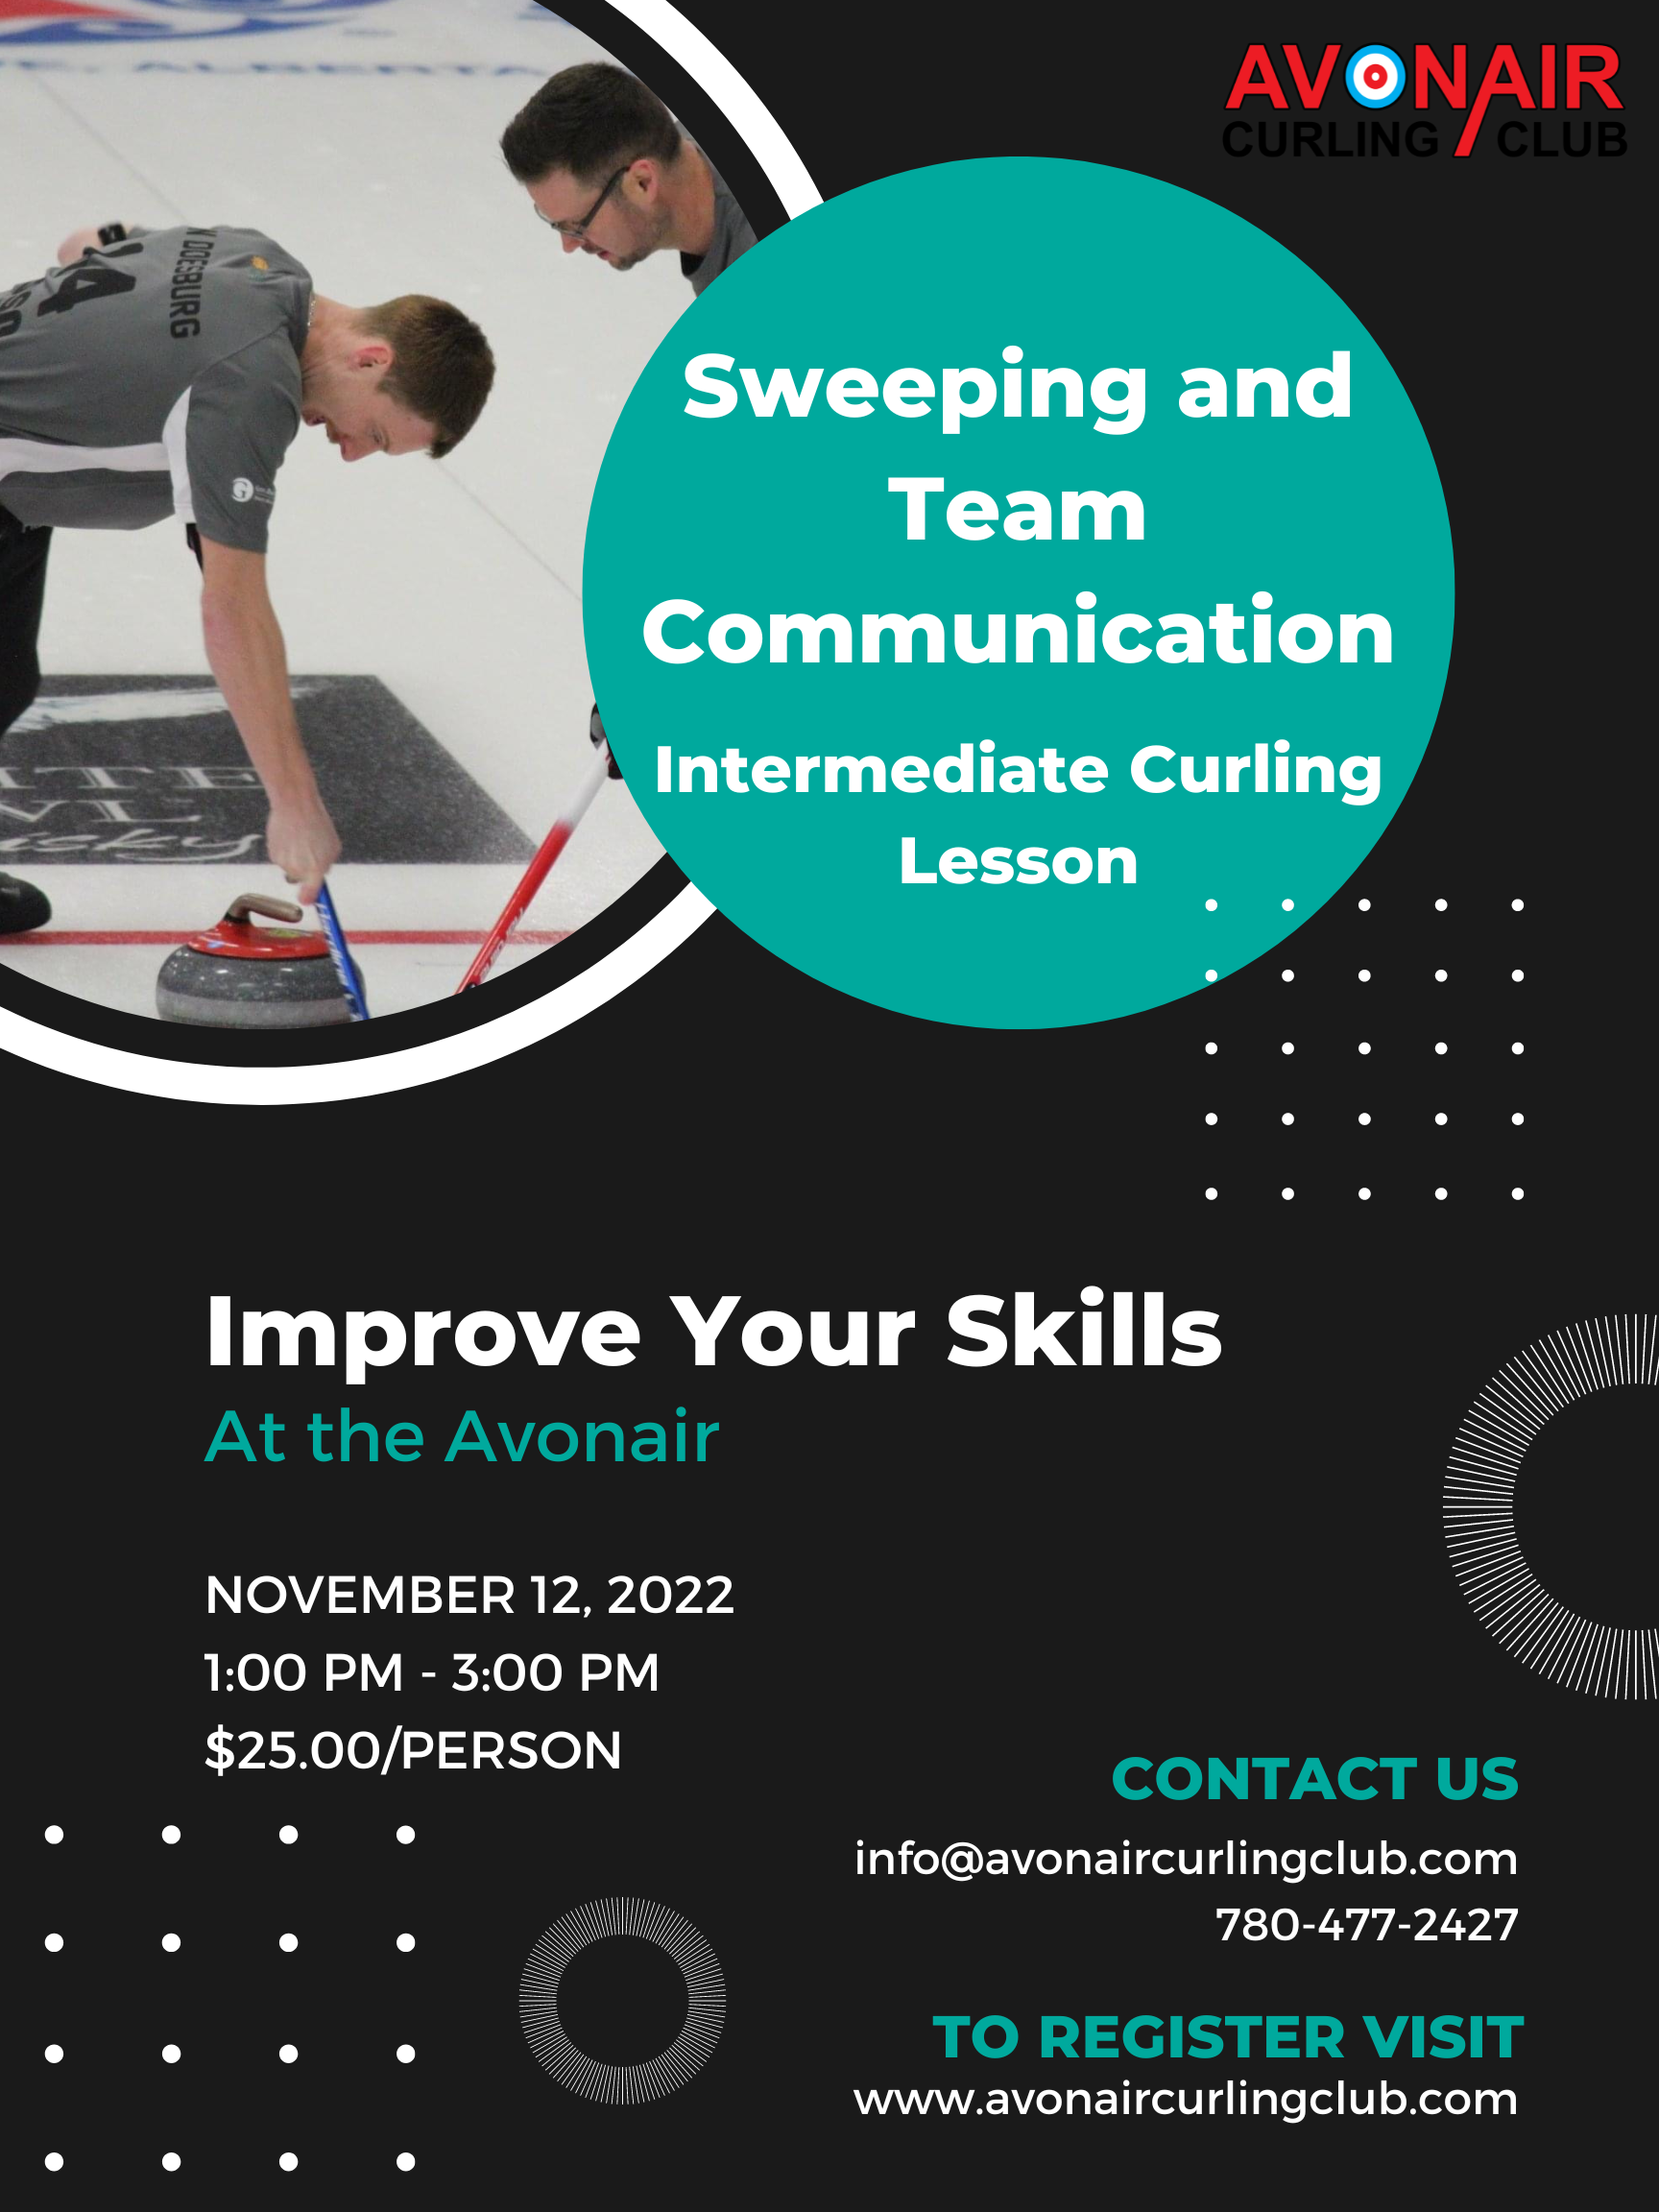 Sweeping and Team Communication Lesson Nov